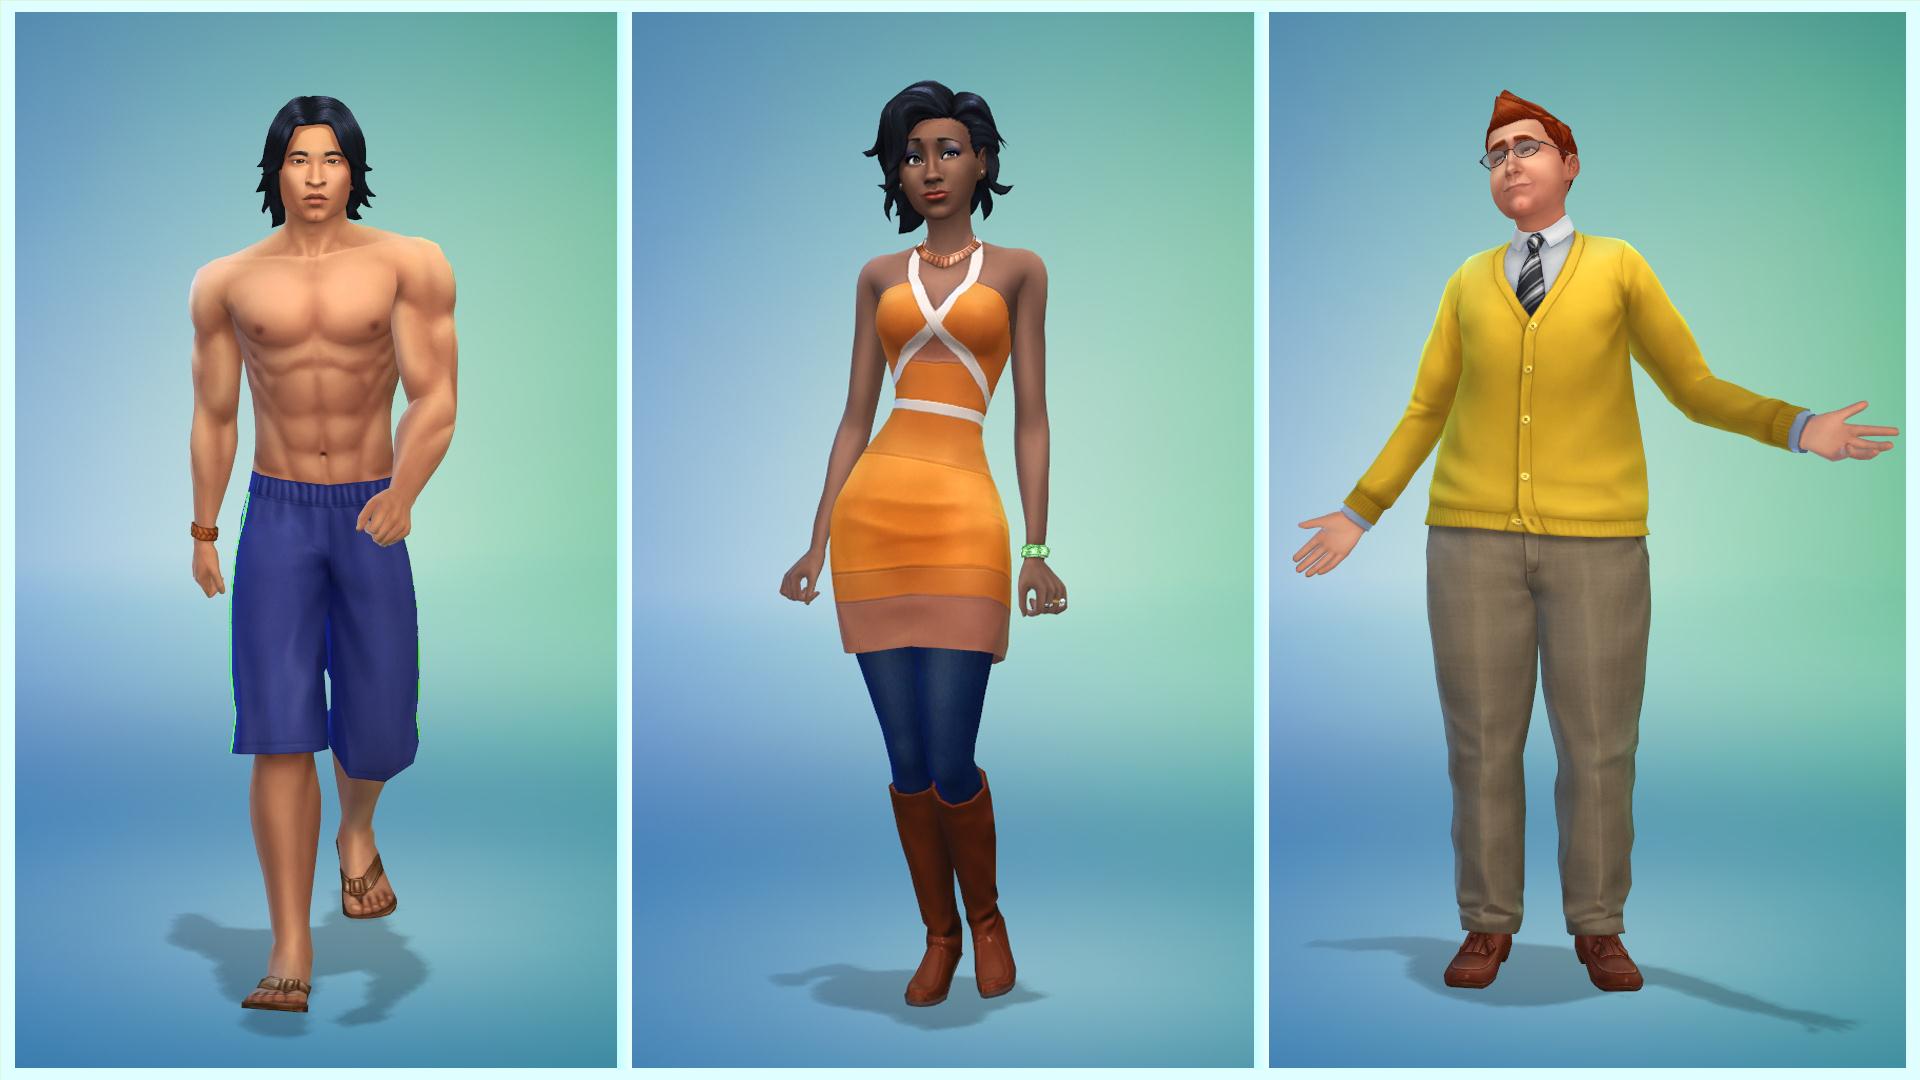 My First Few Hours With The Sims 4